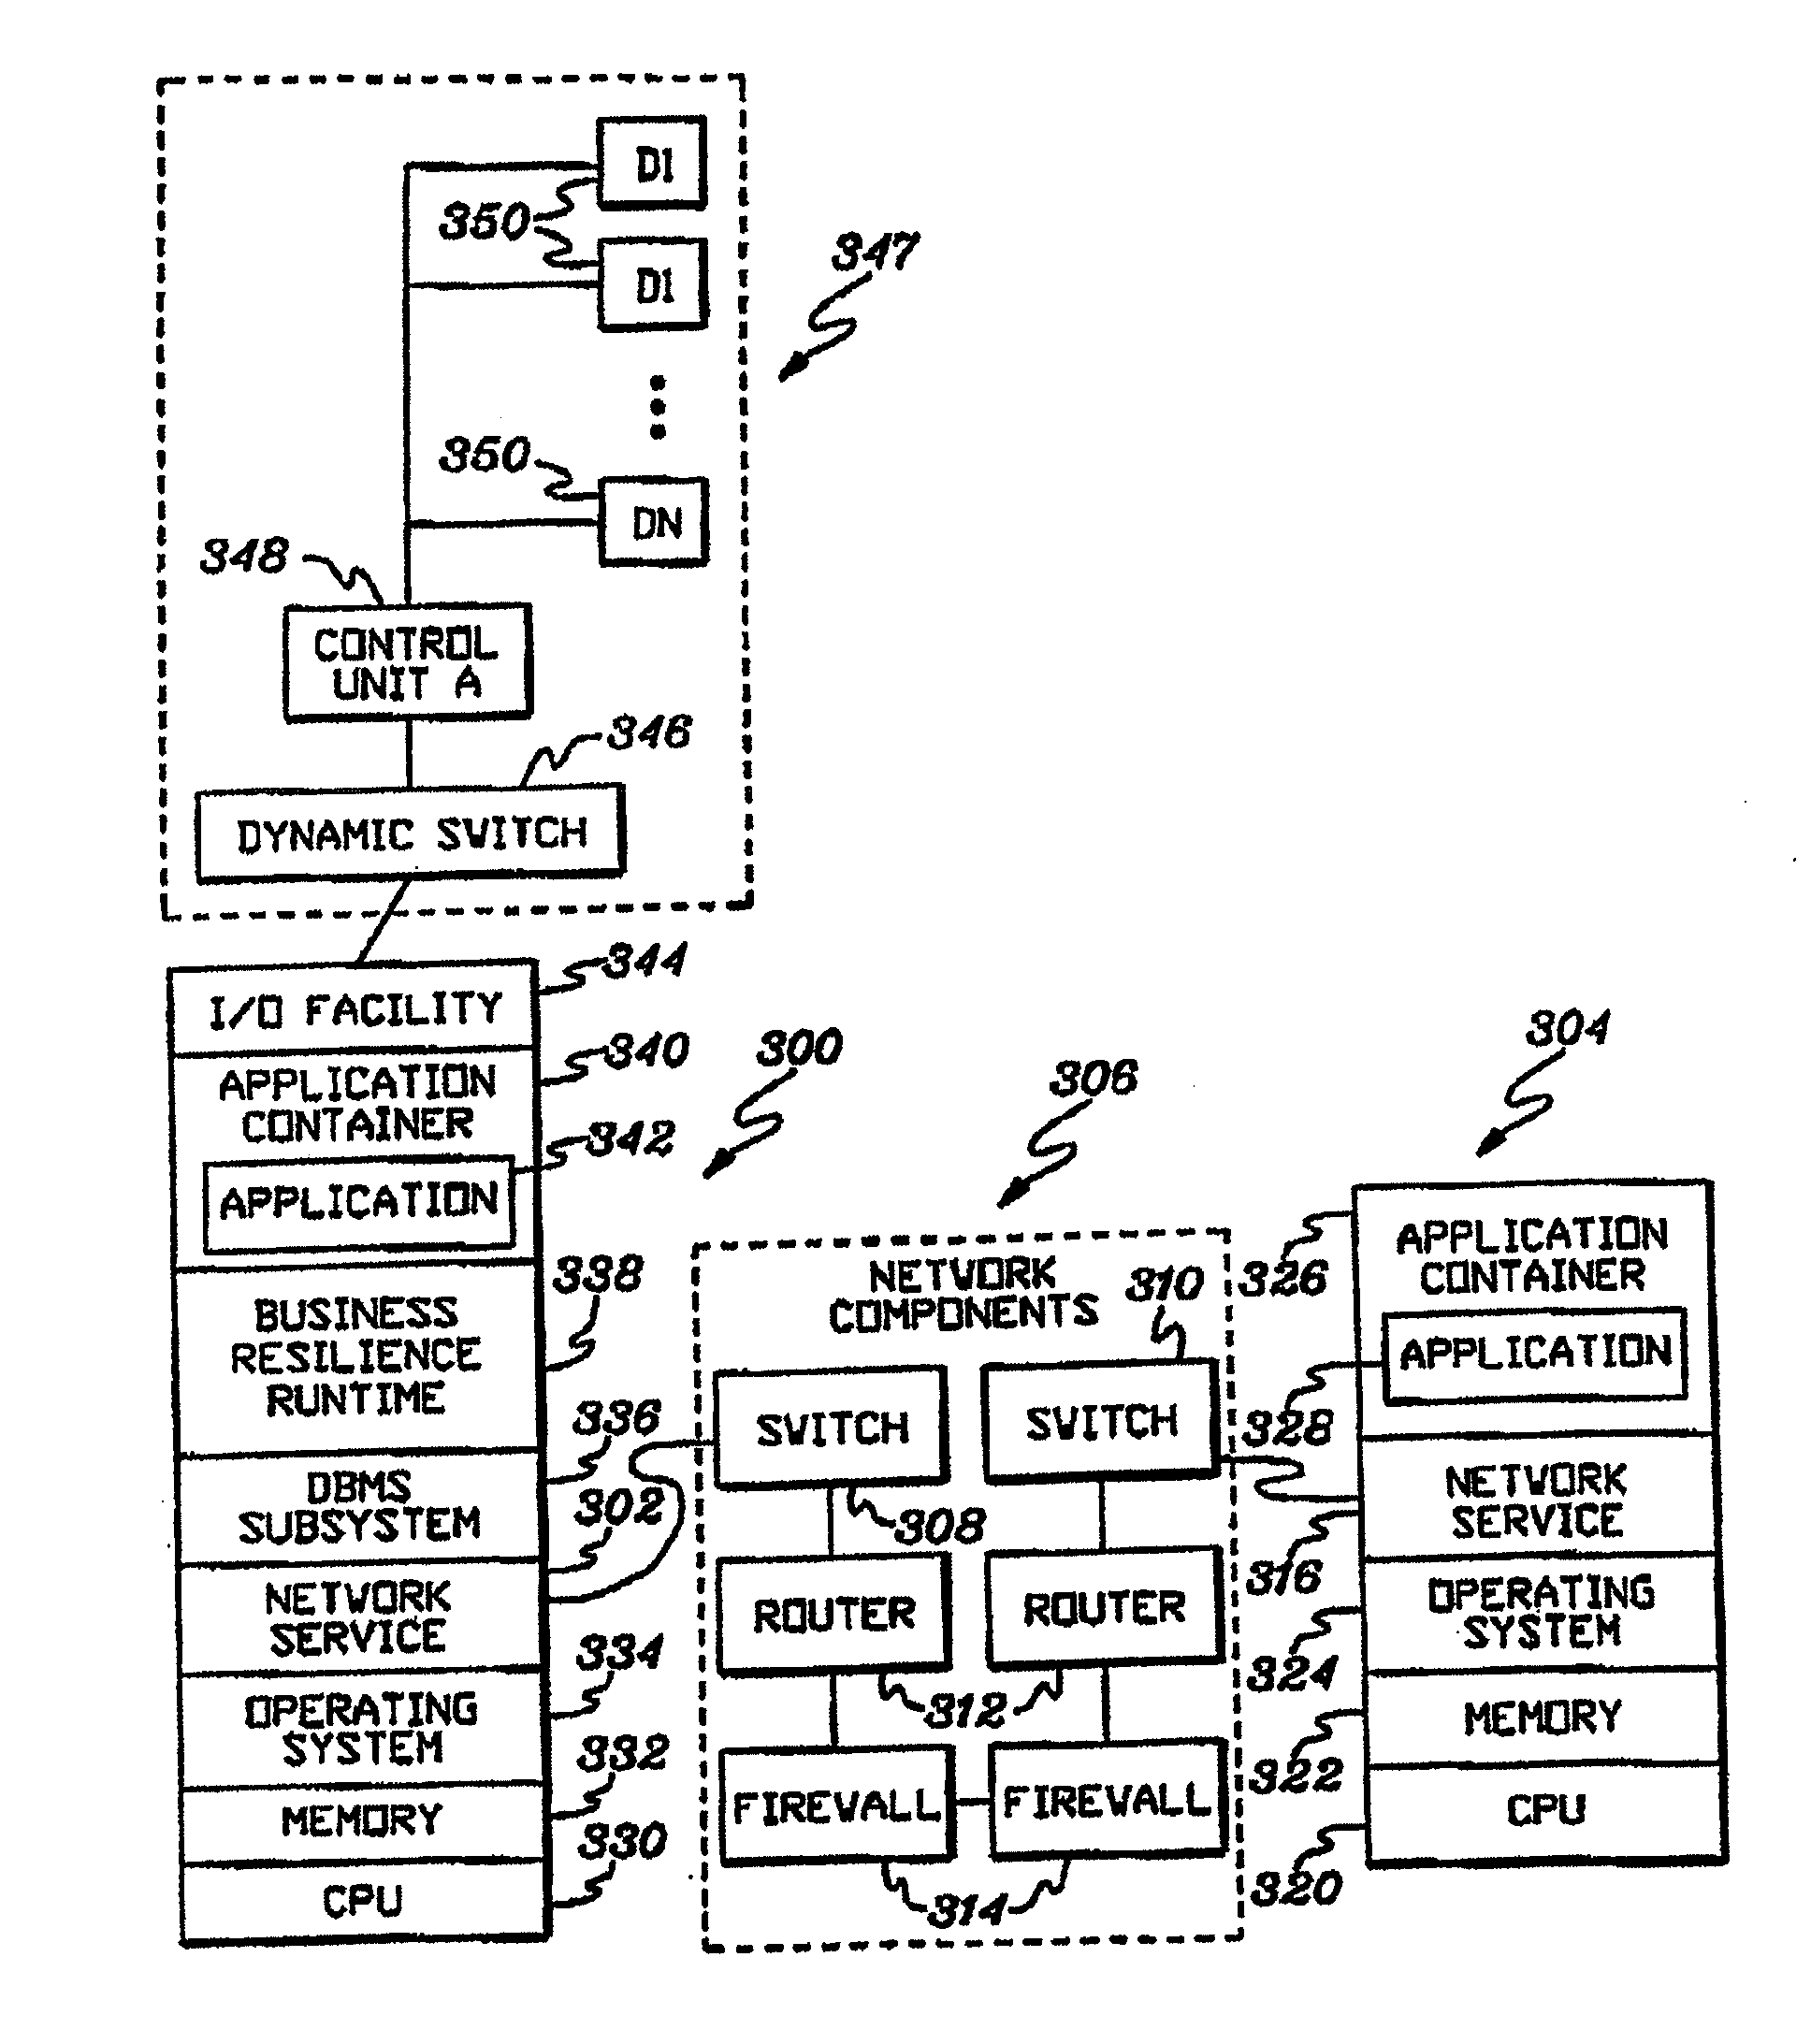 Use of redundancy groups in runtime computer management of business applications